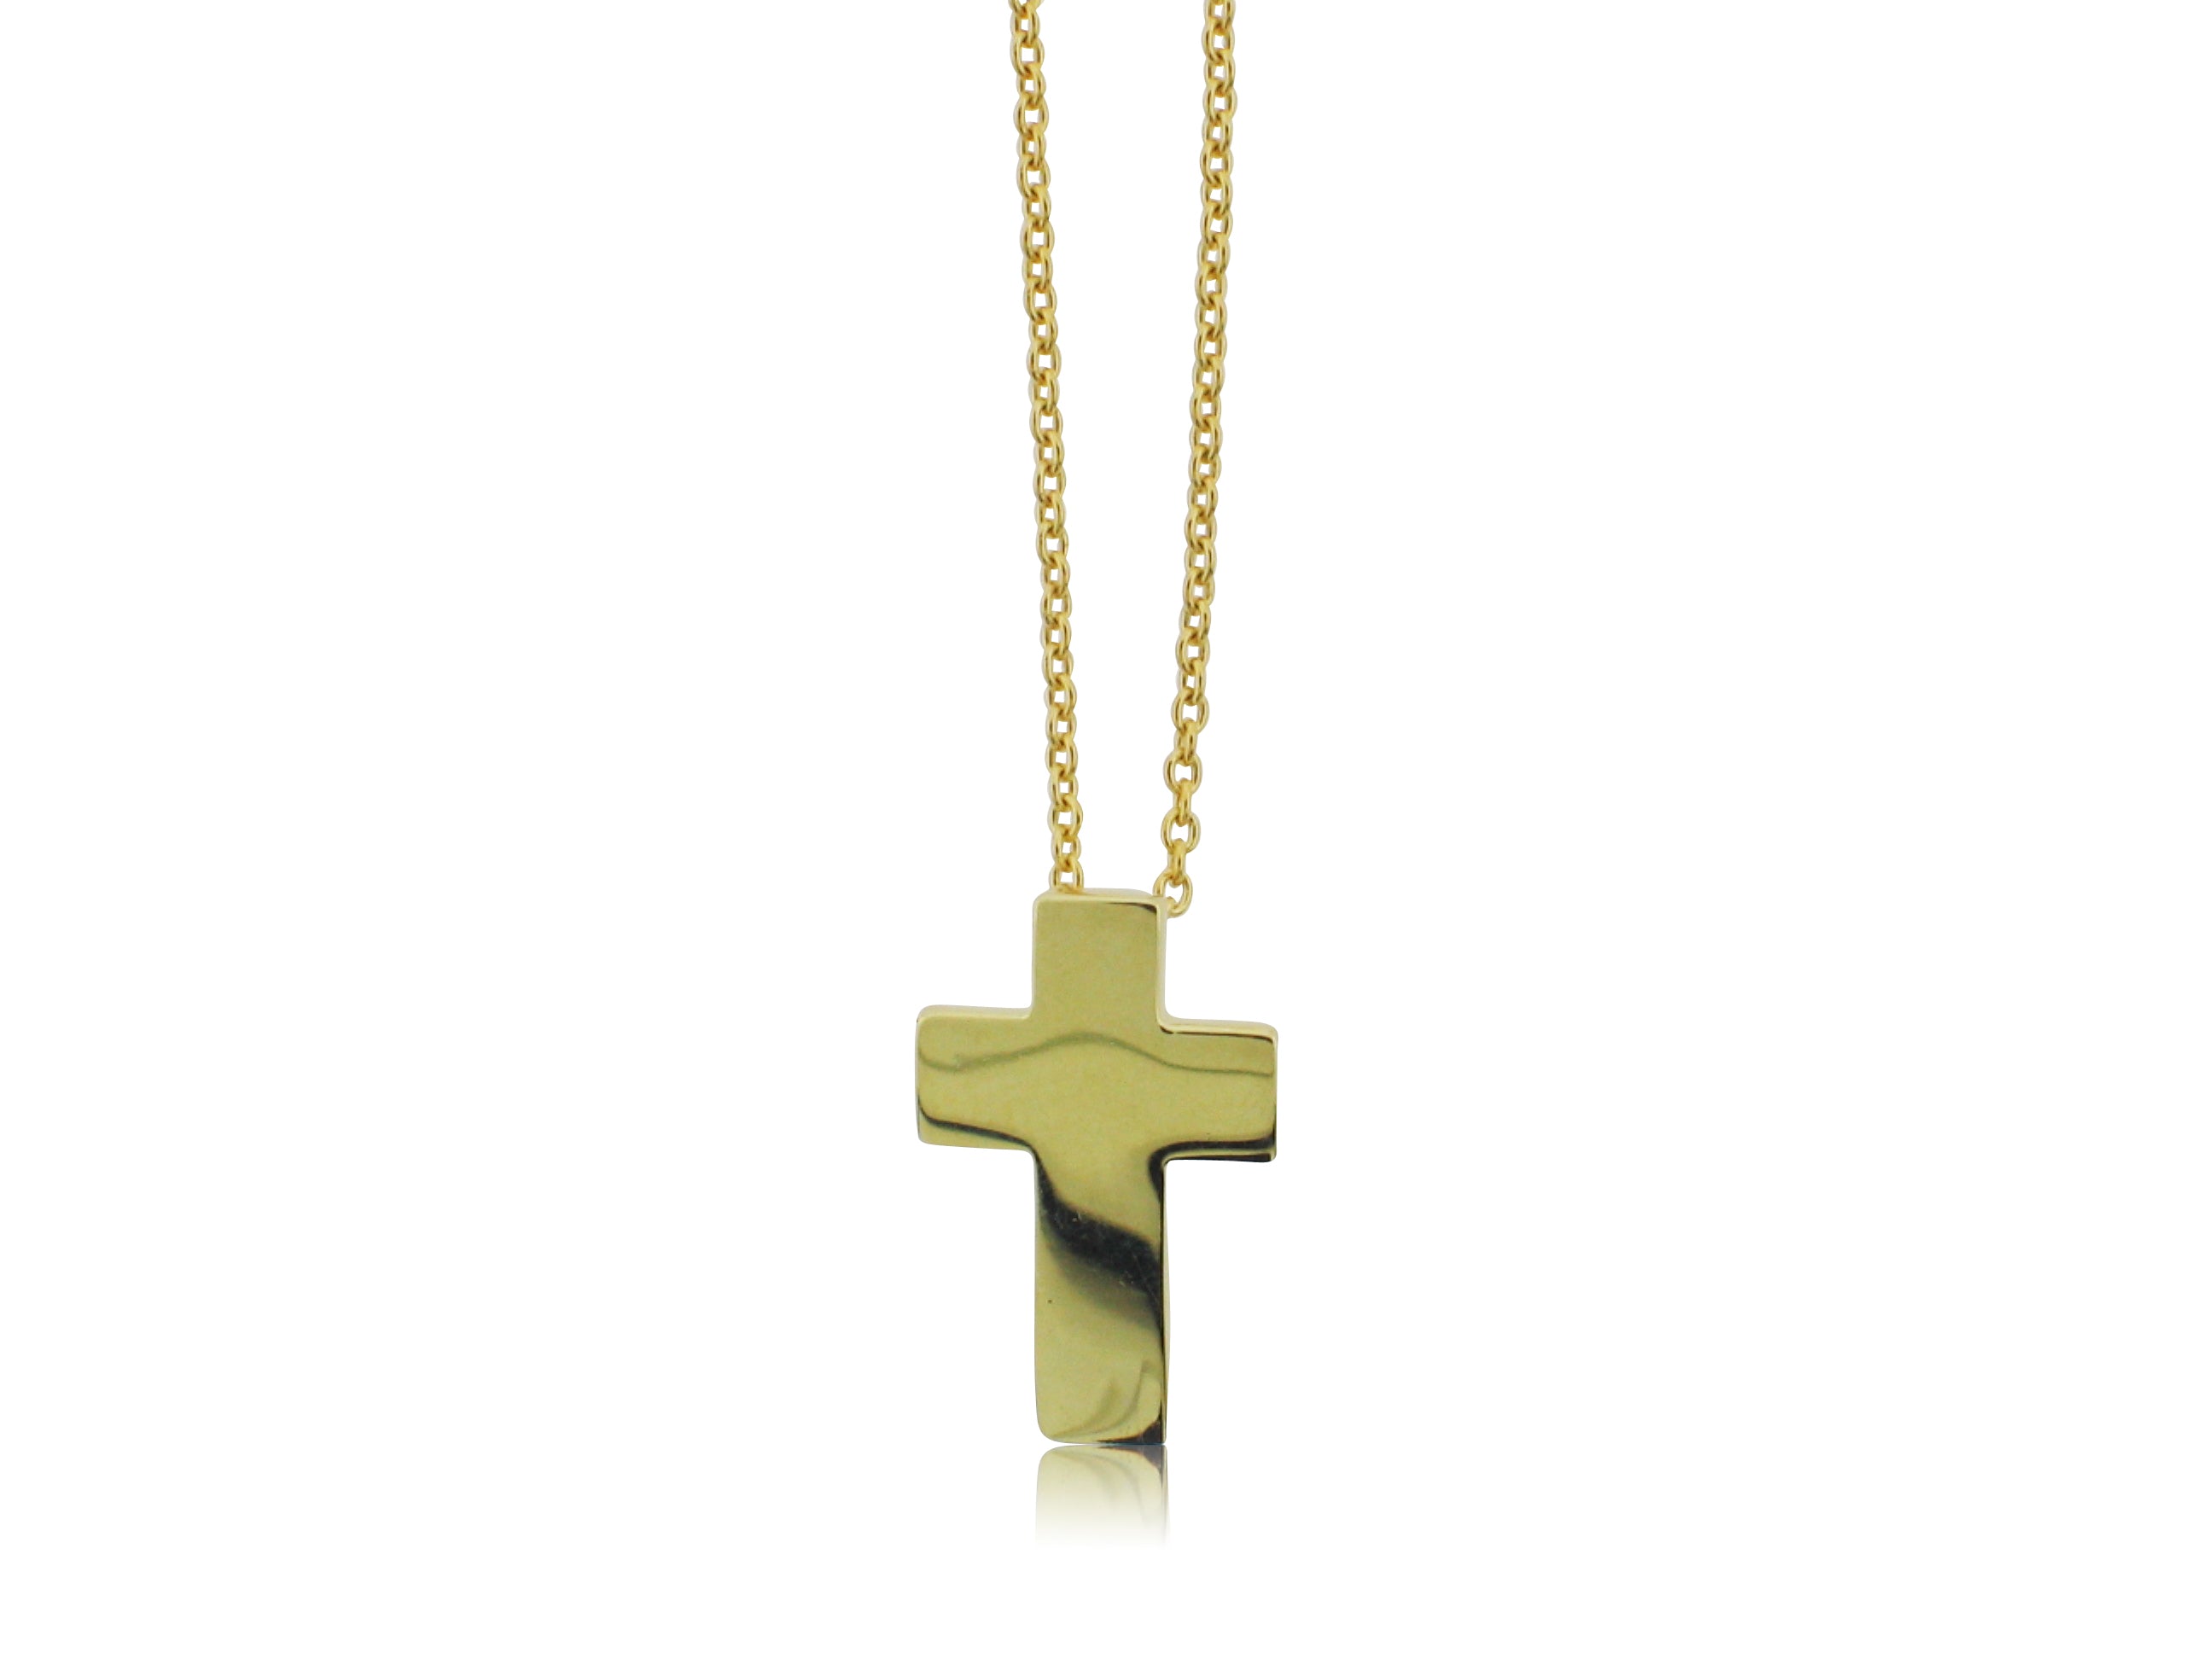 ROBERTO COIN 18K YELLOW GOLD CROSS ON CHAIN FROM THE GOLD COLLECTION